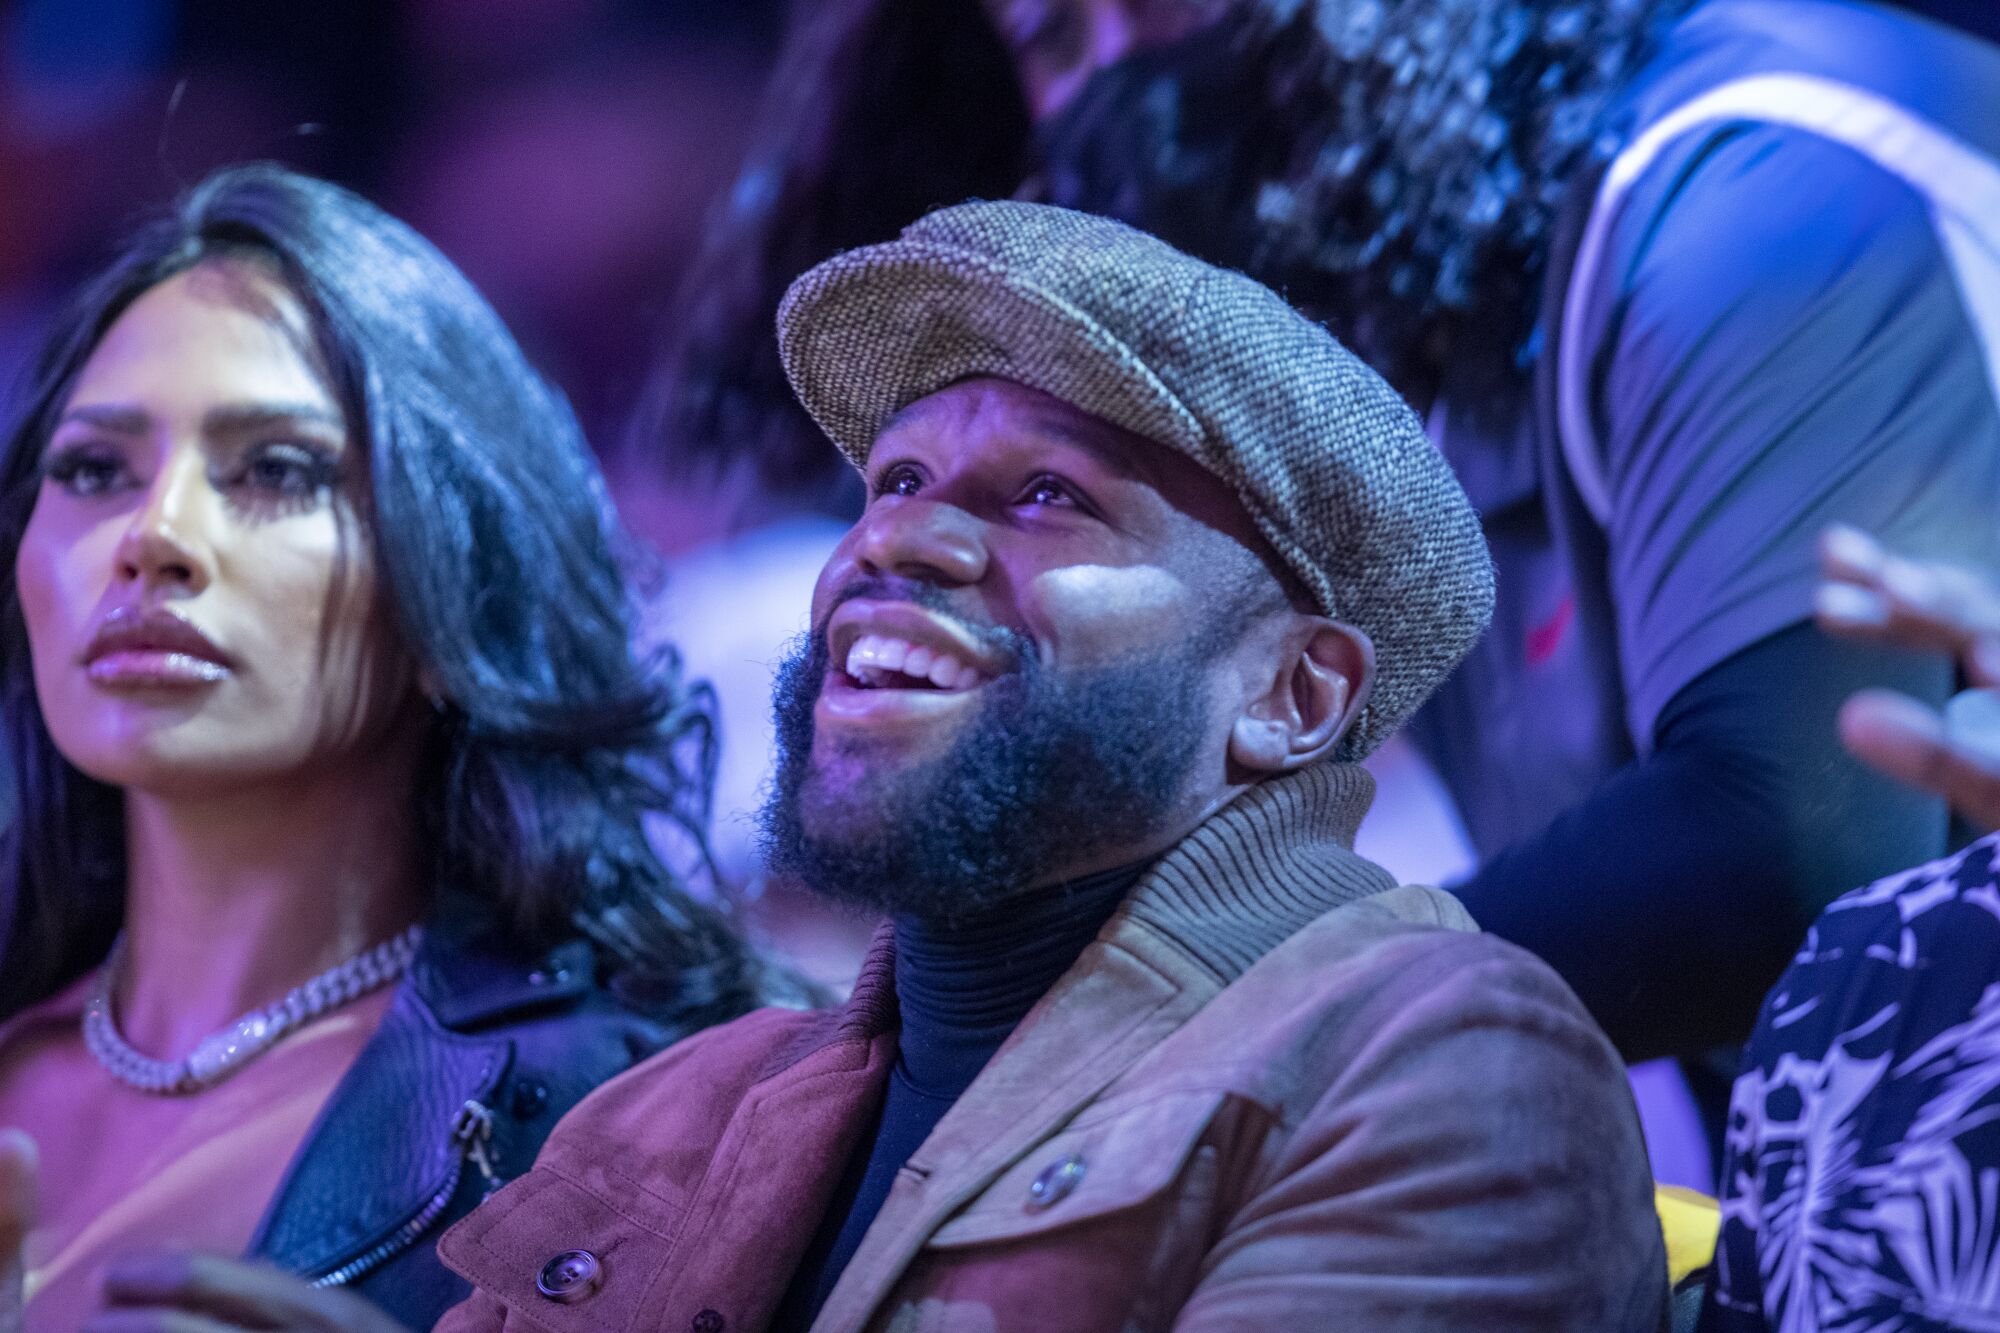 Floyd Mayweather Jr. watches the Lakers at Staples Center.